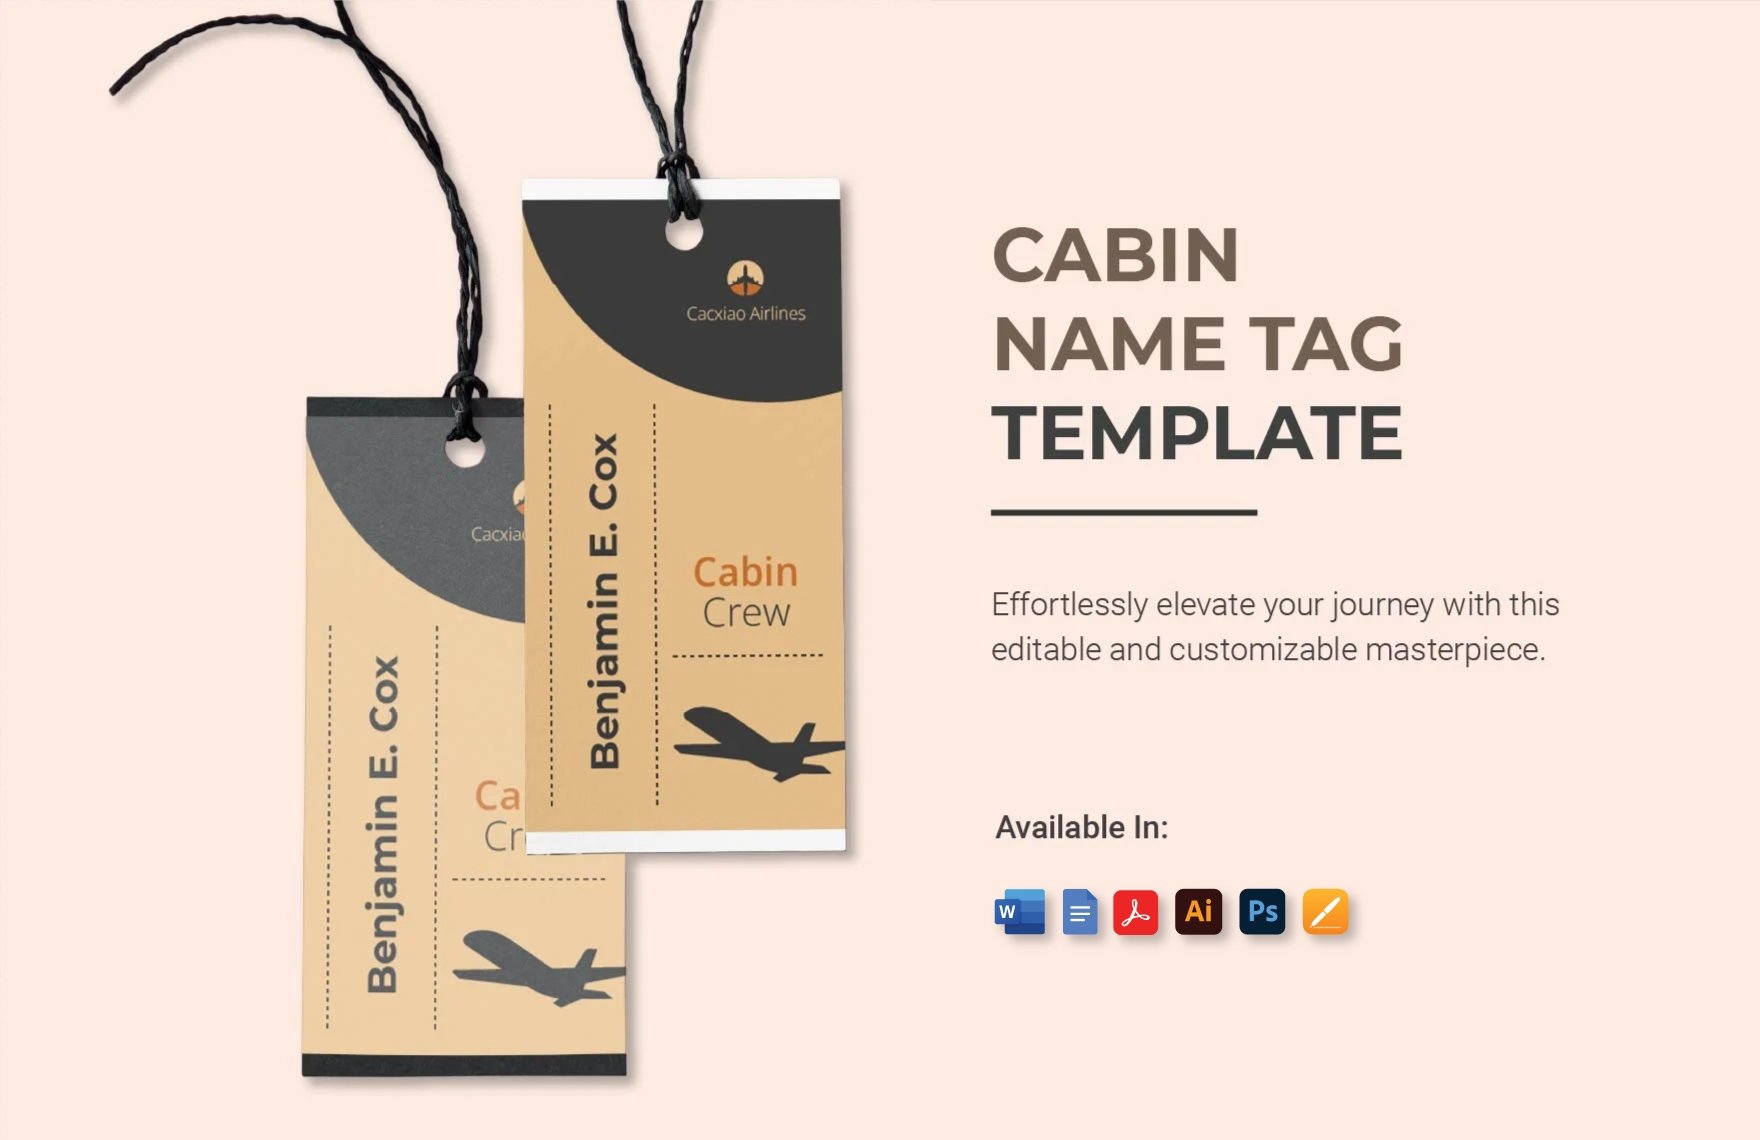 Cabin Name Tag Template